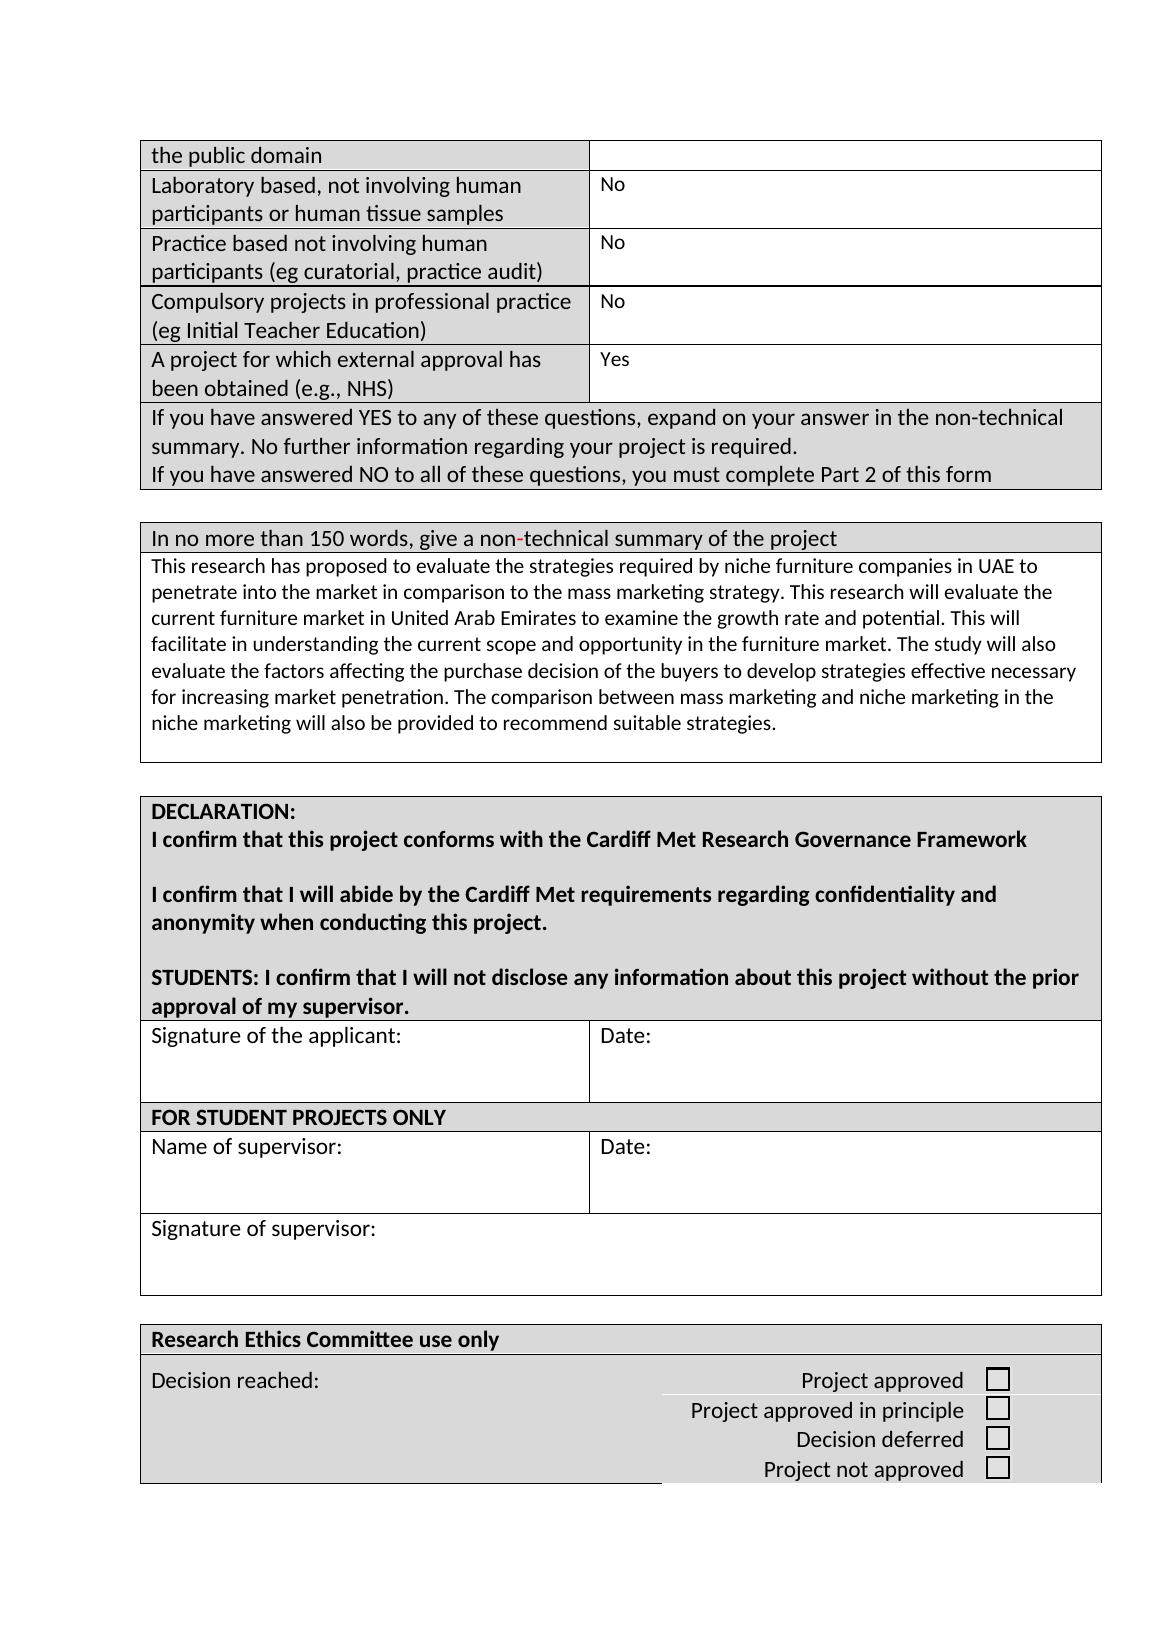 Ethics Approval Application for Research Projects_2